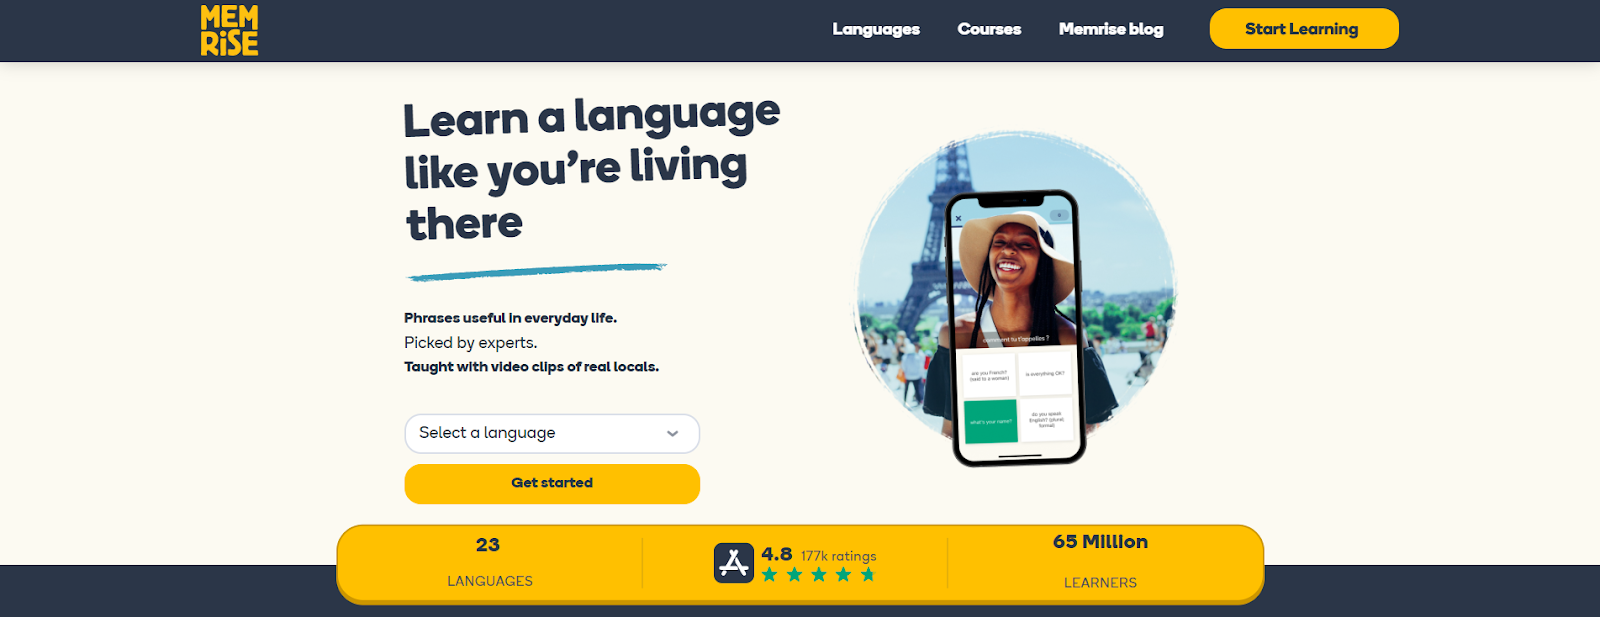 Memrise to learn a language